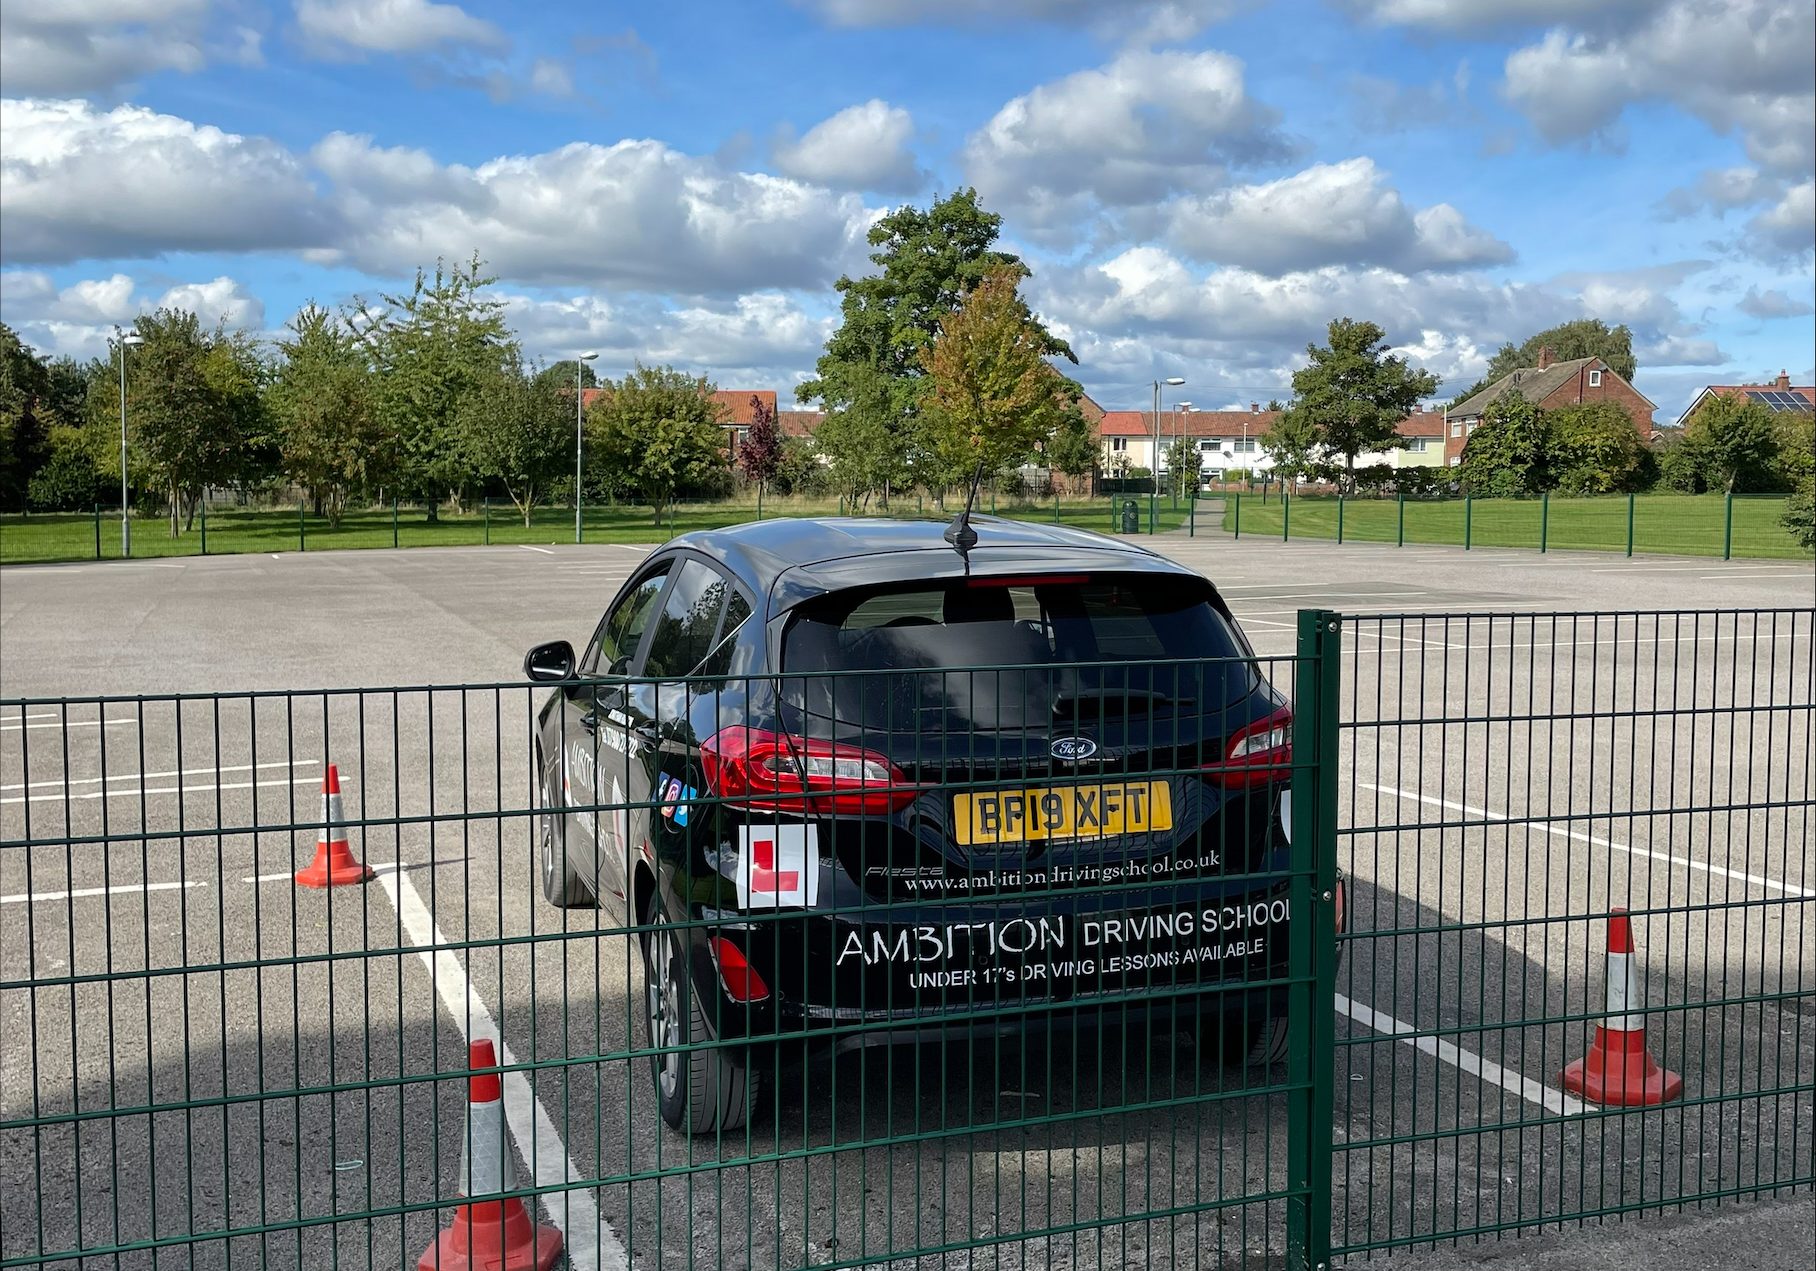 Ambition driving school car parked in the fenced education village